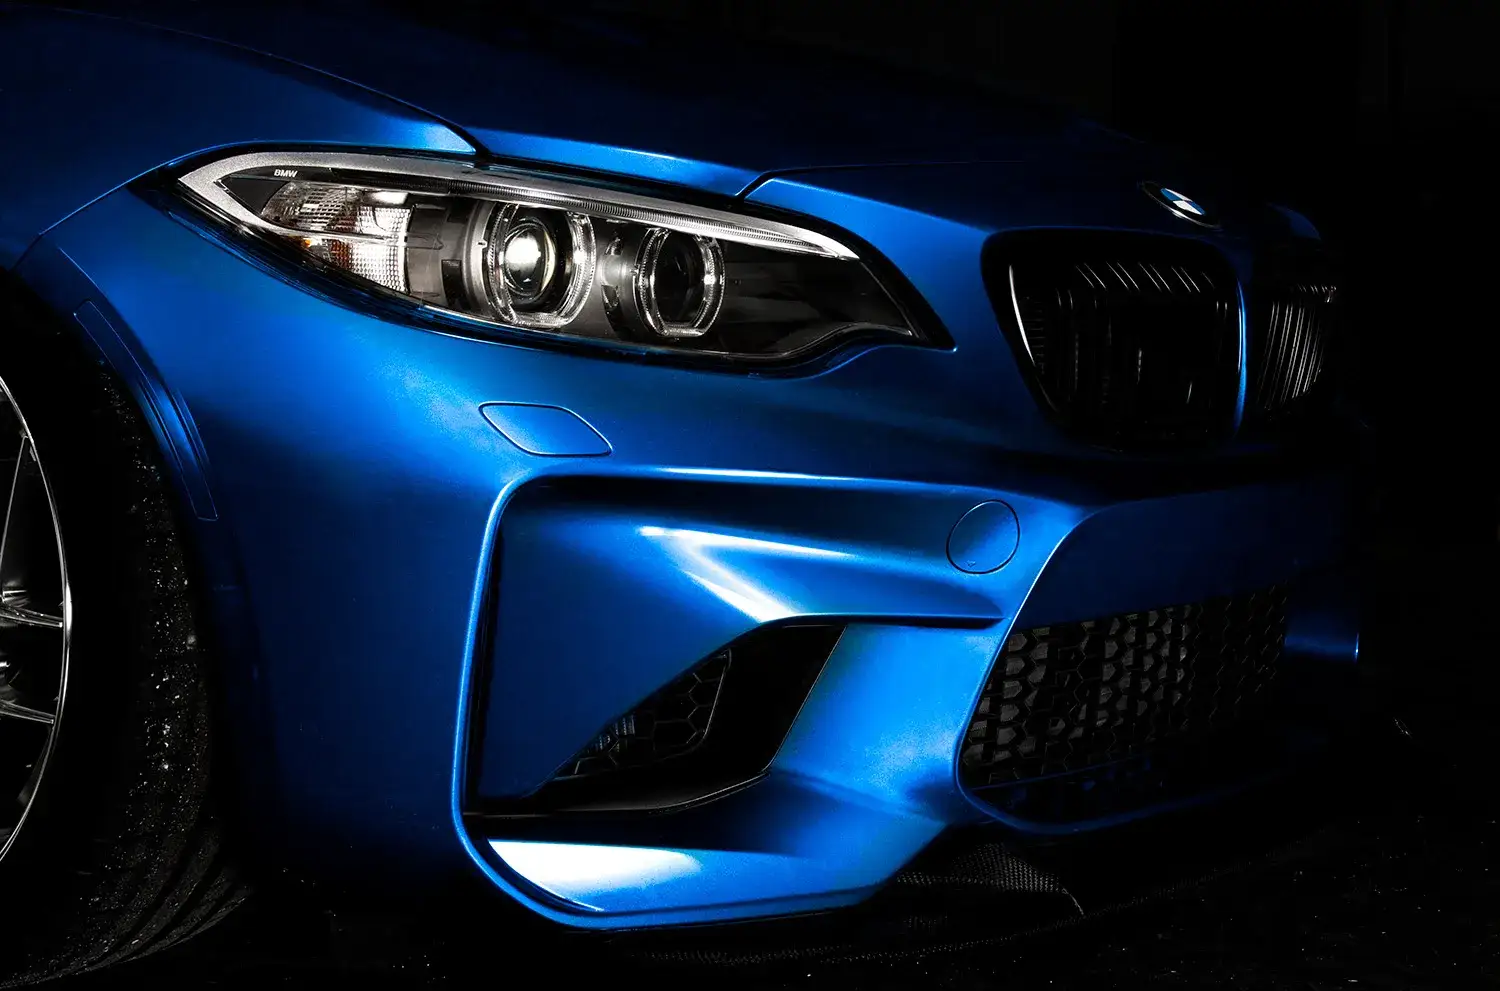 A close-up image of a 2017 BMW M2's grille.